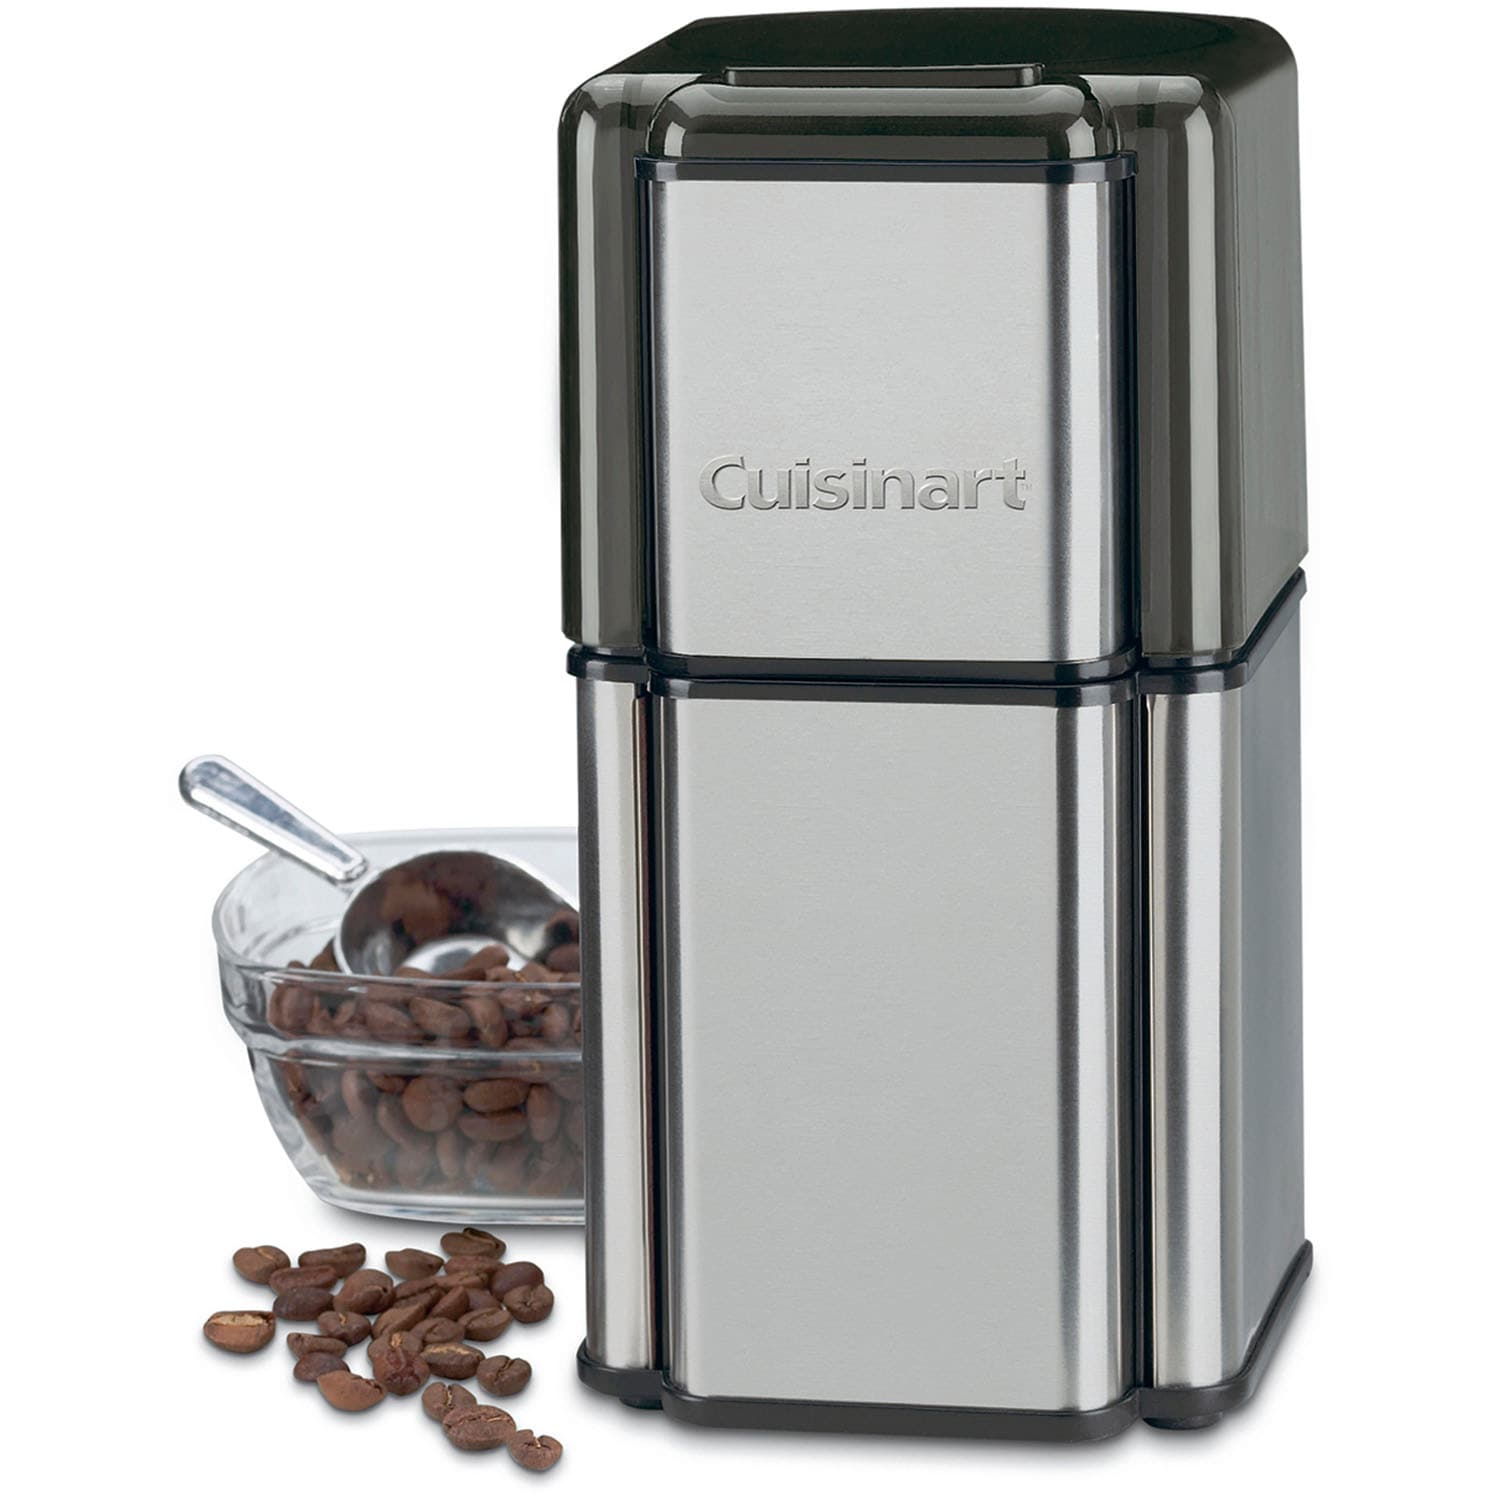 Spices and walnuts grinder, 200 W - Cuisinart